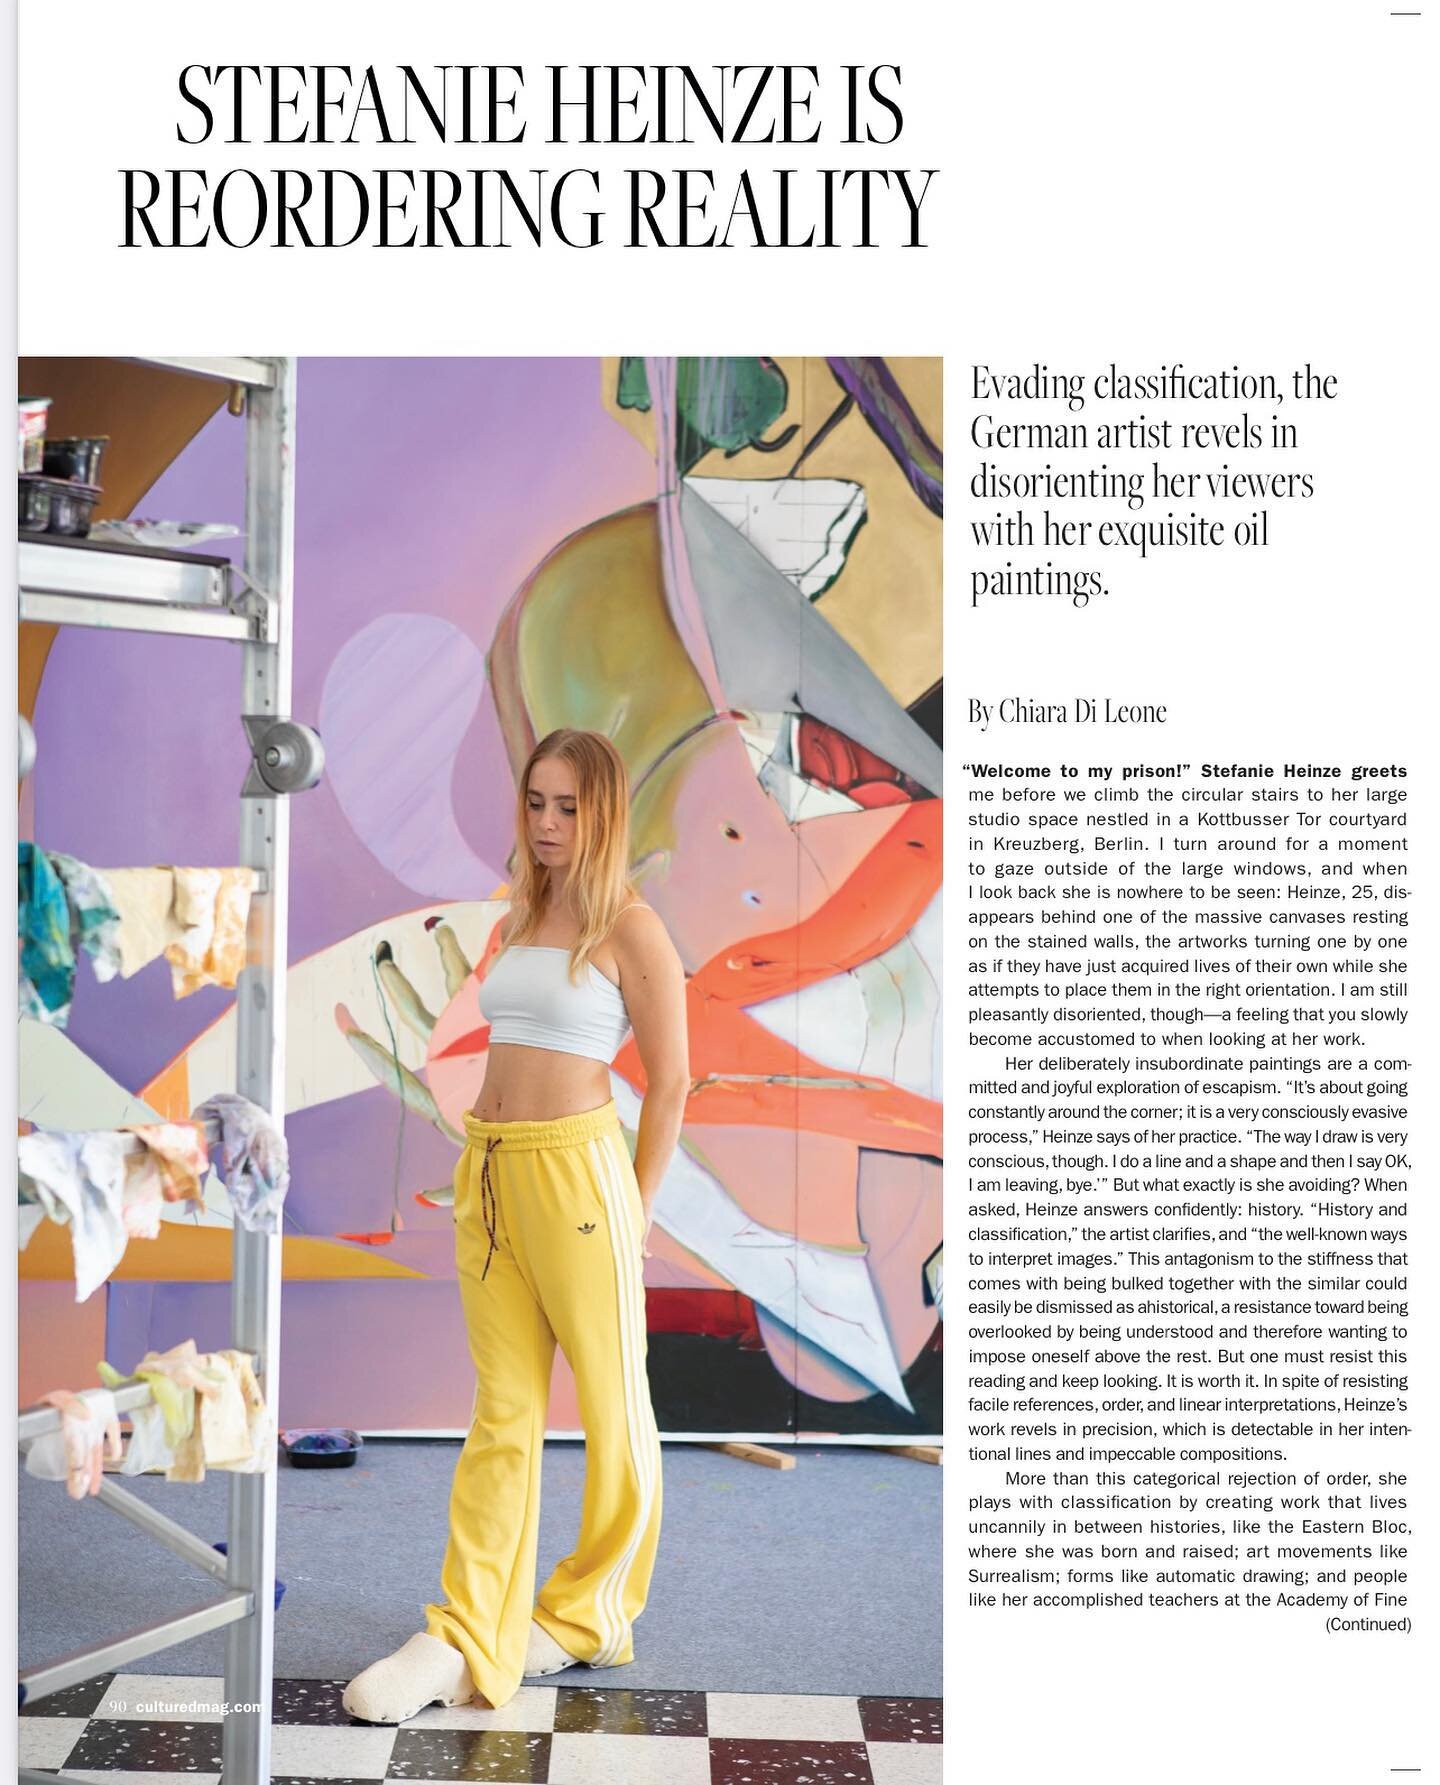 Thank you for the beautiful feature of our 2022 artist in residence Stefanie Heinze @cultured_mag ✨